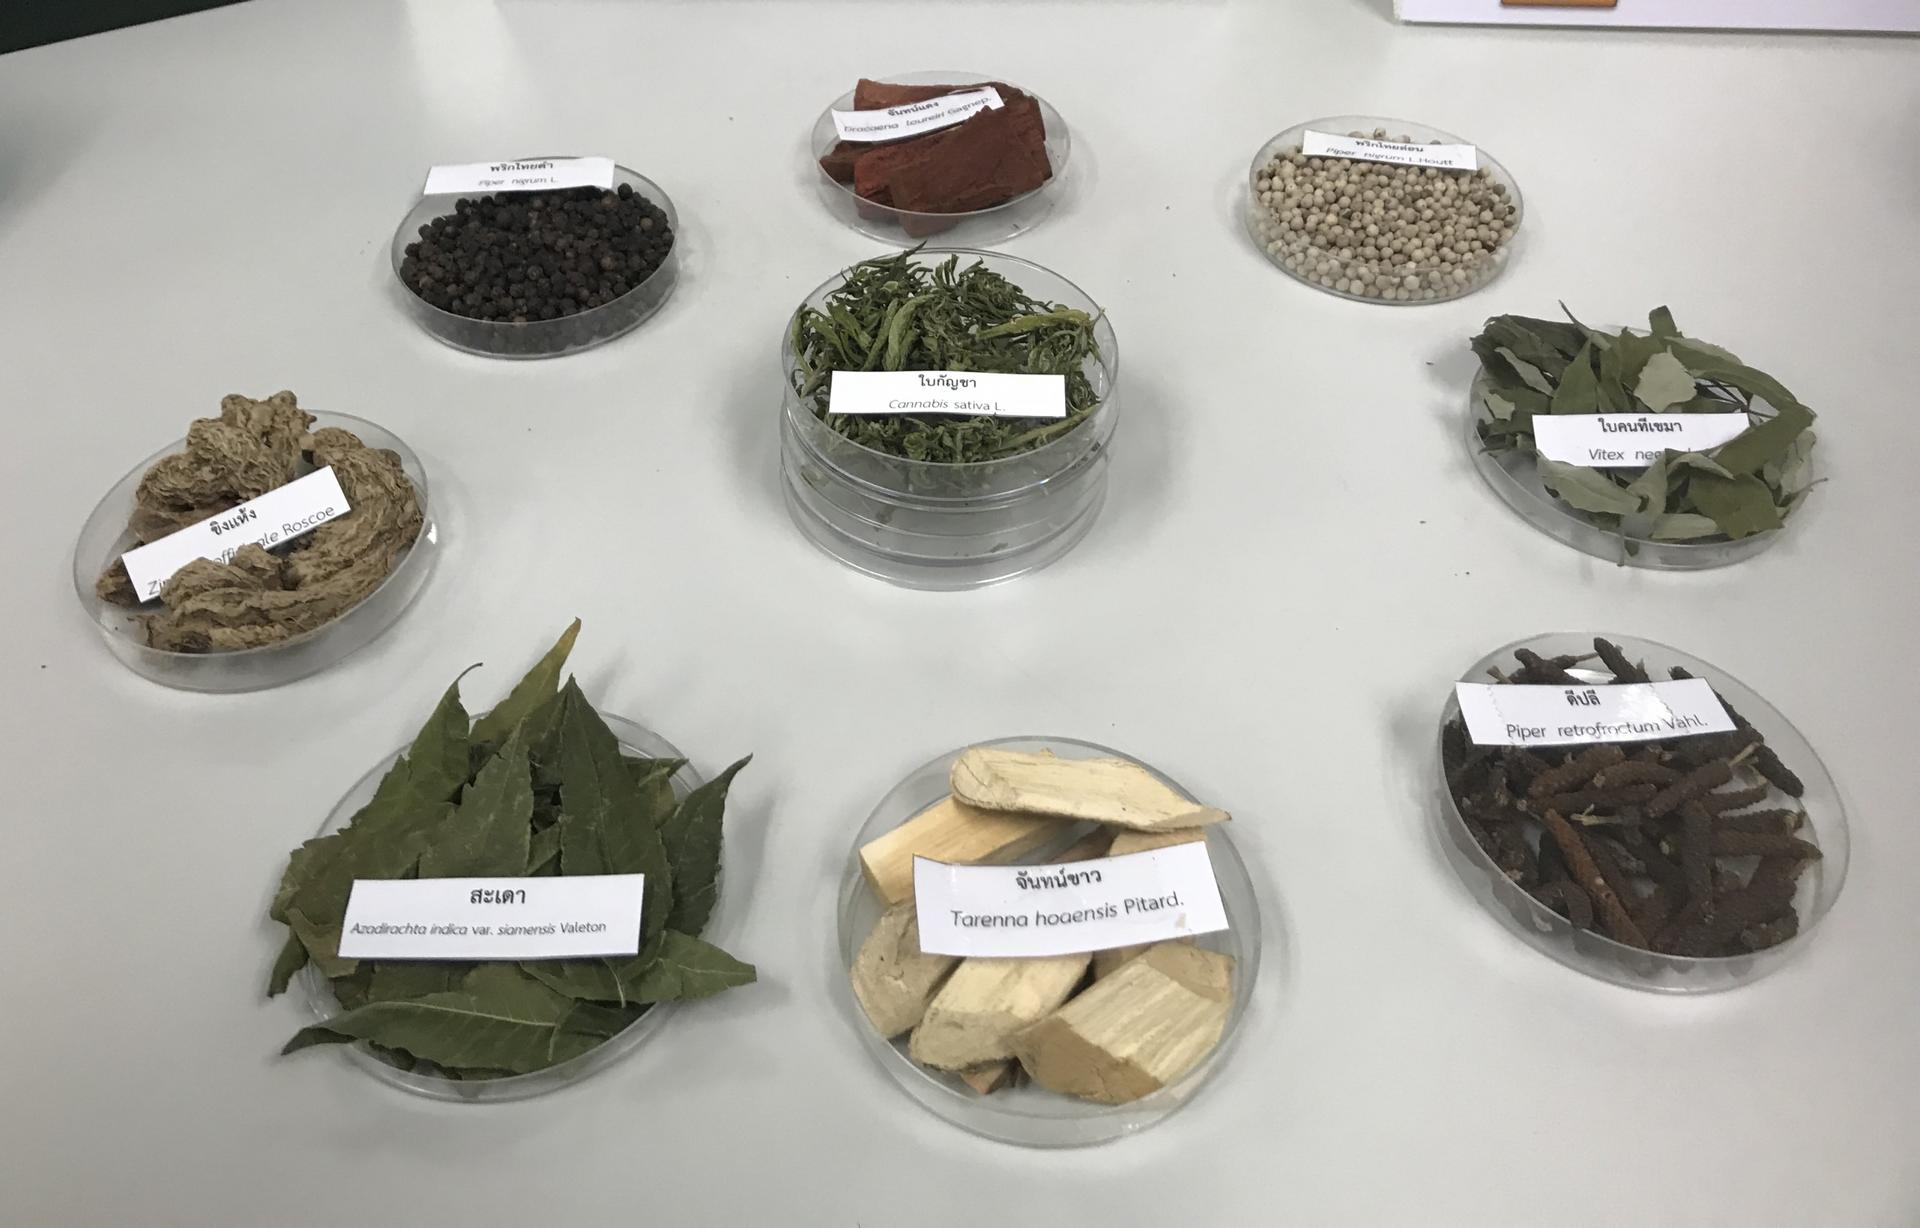 Ingredients used in a prototypical THC-infused powder invented by Thai scientists. 